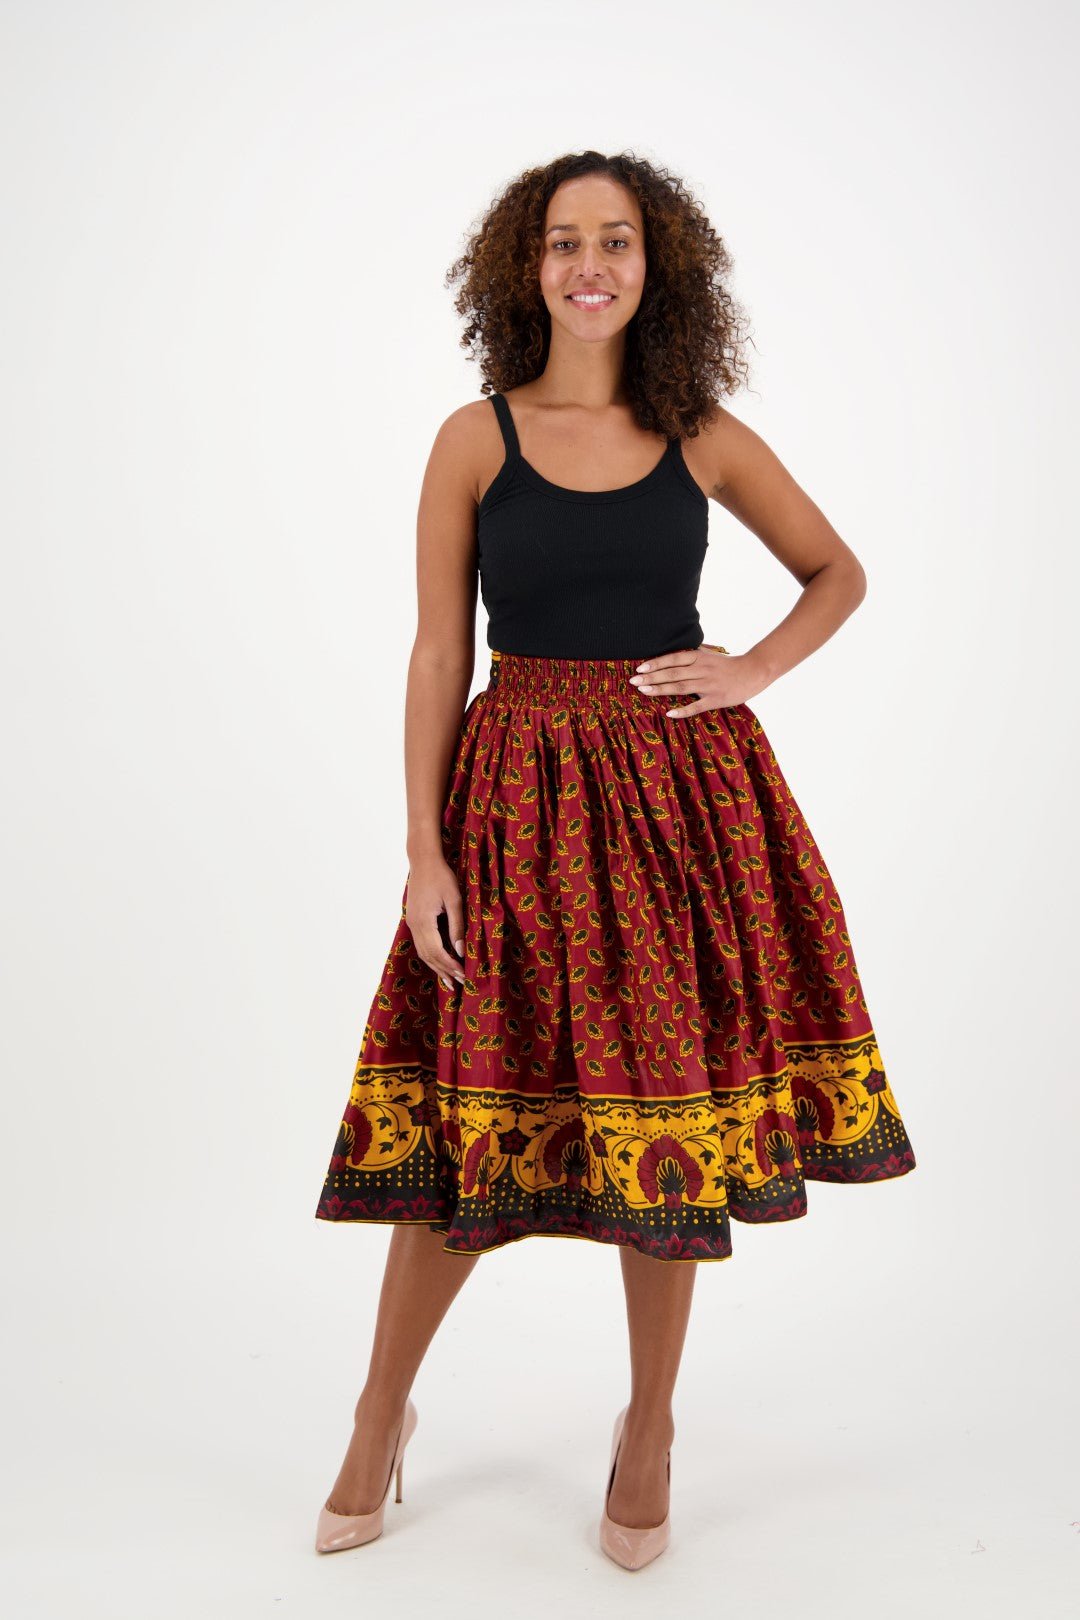 Mid-Length African Print Maxi Skirt Pockets Headwrap Included 16321-1128 - Advance Apparels Inc